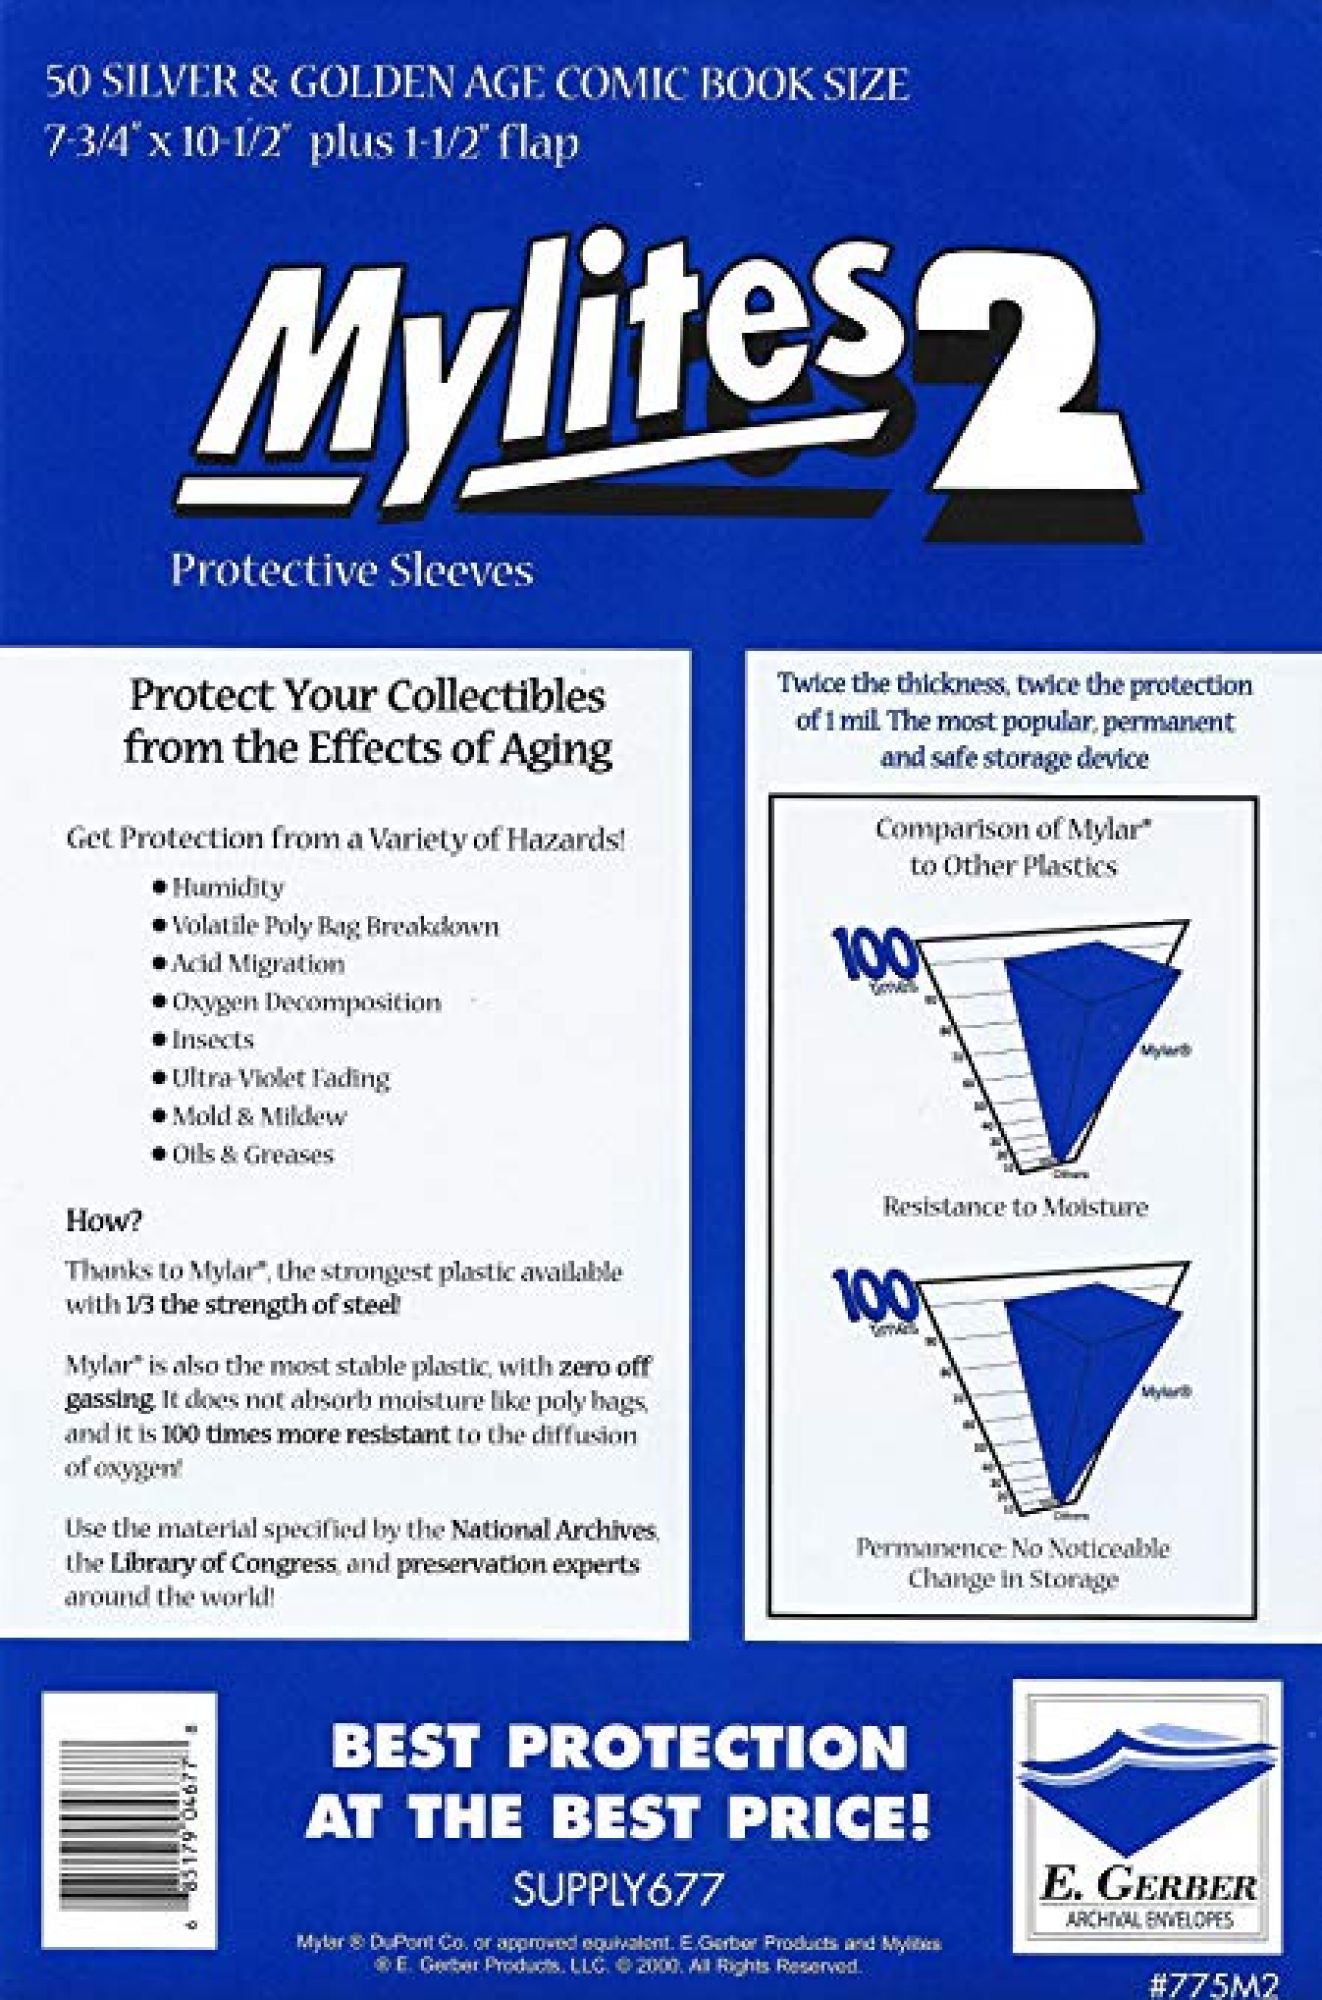 Mylites 2, Silver/Golden Age (197x267mm) Pack-50